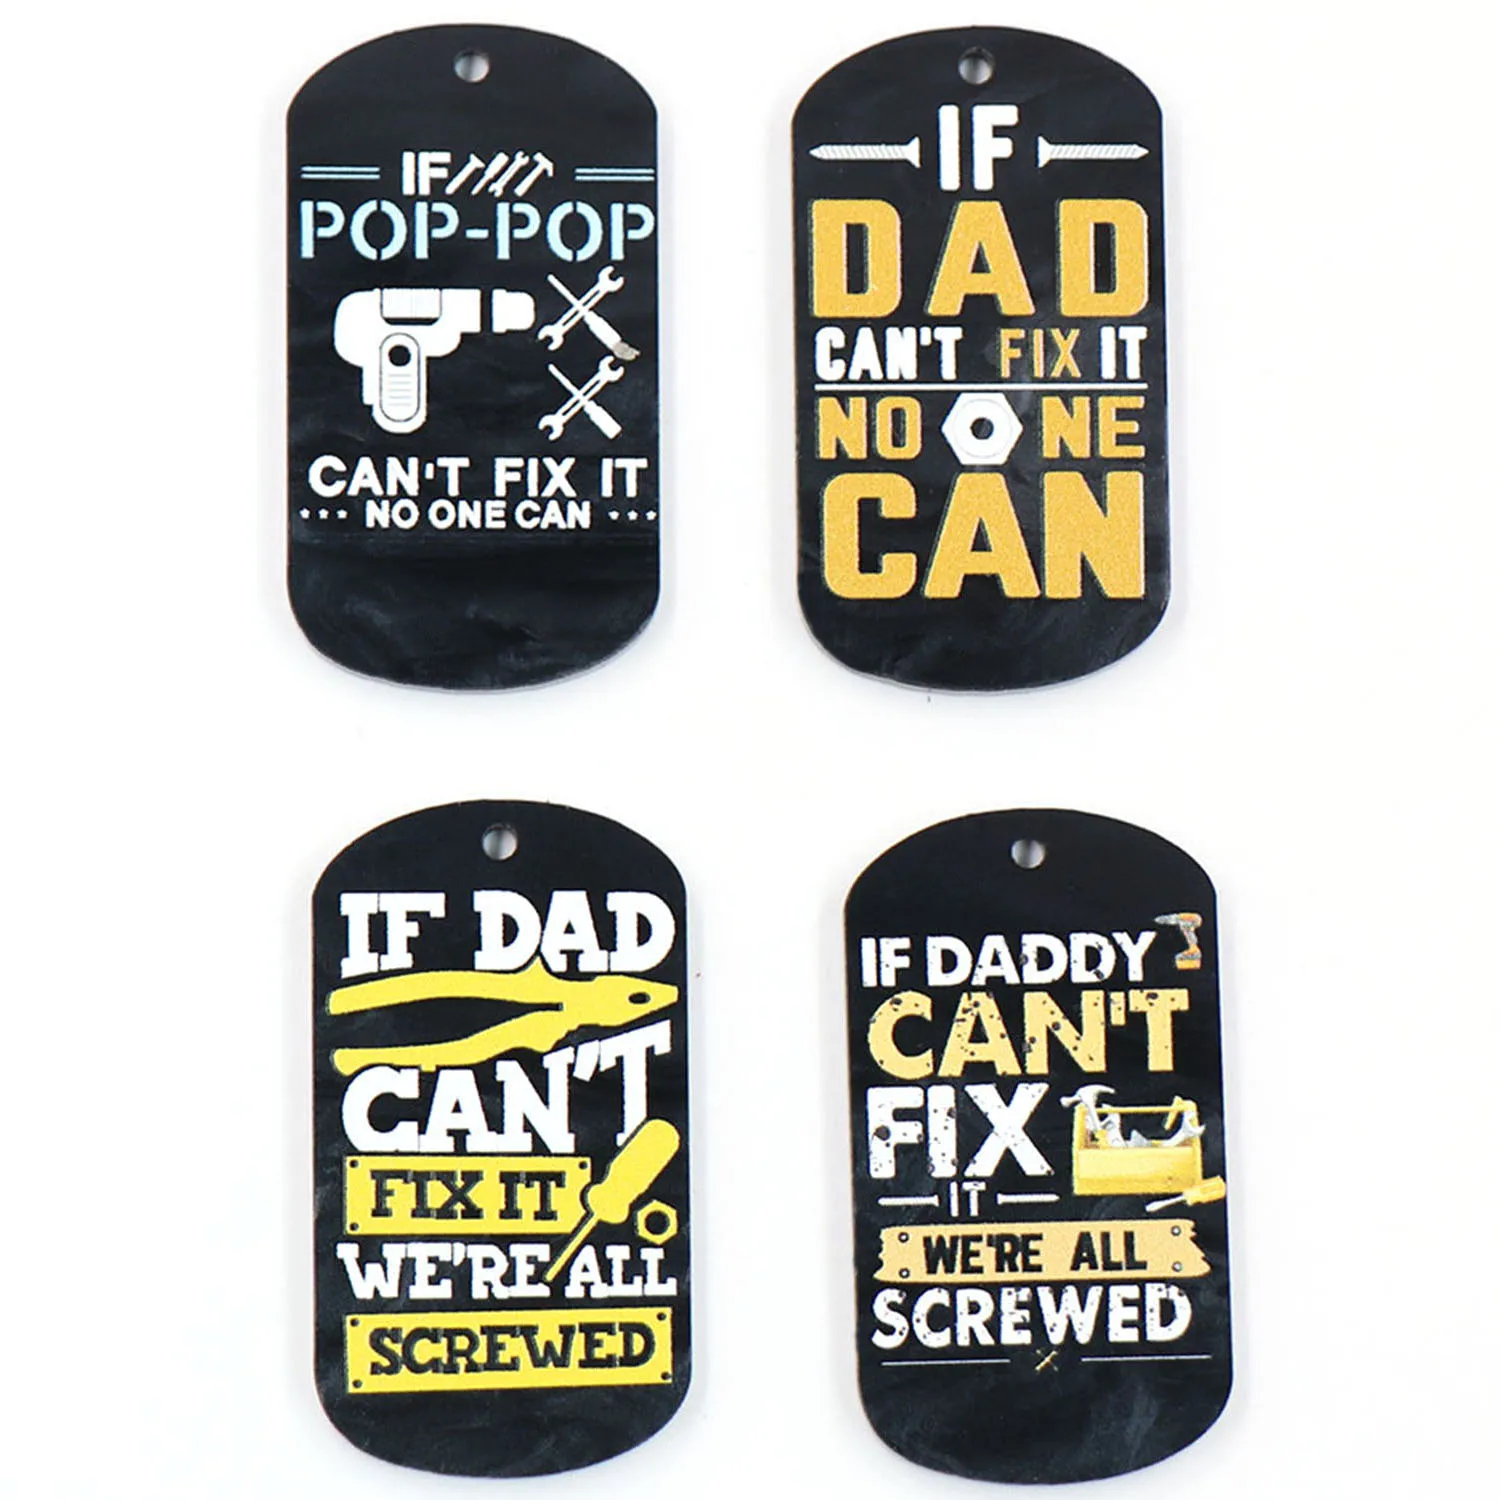 

set of 10-45mm Hot sale CN IF DAD CAN'T FIX IT NO ONE CAN Father's Day Gift Acrylic Findings for Keychain